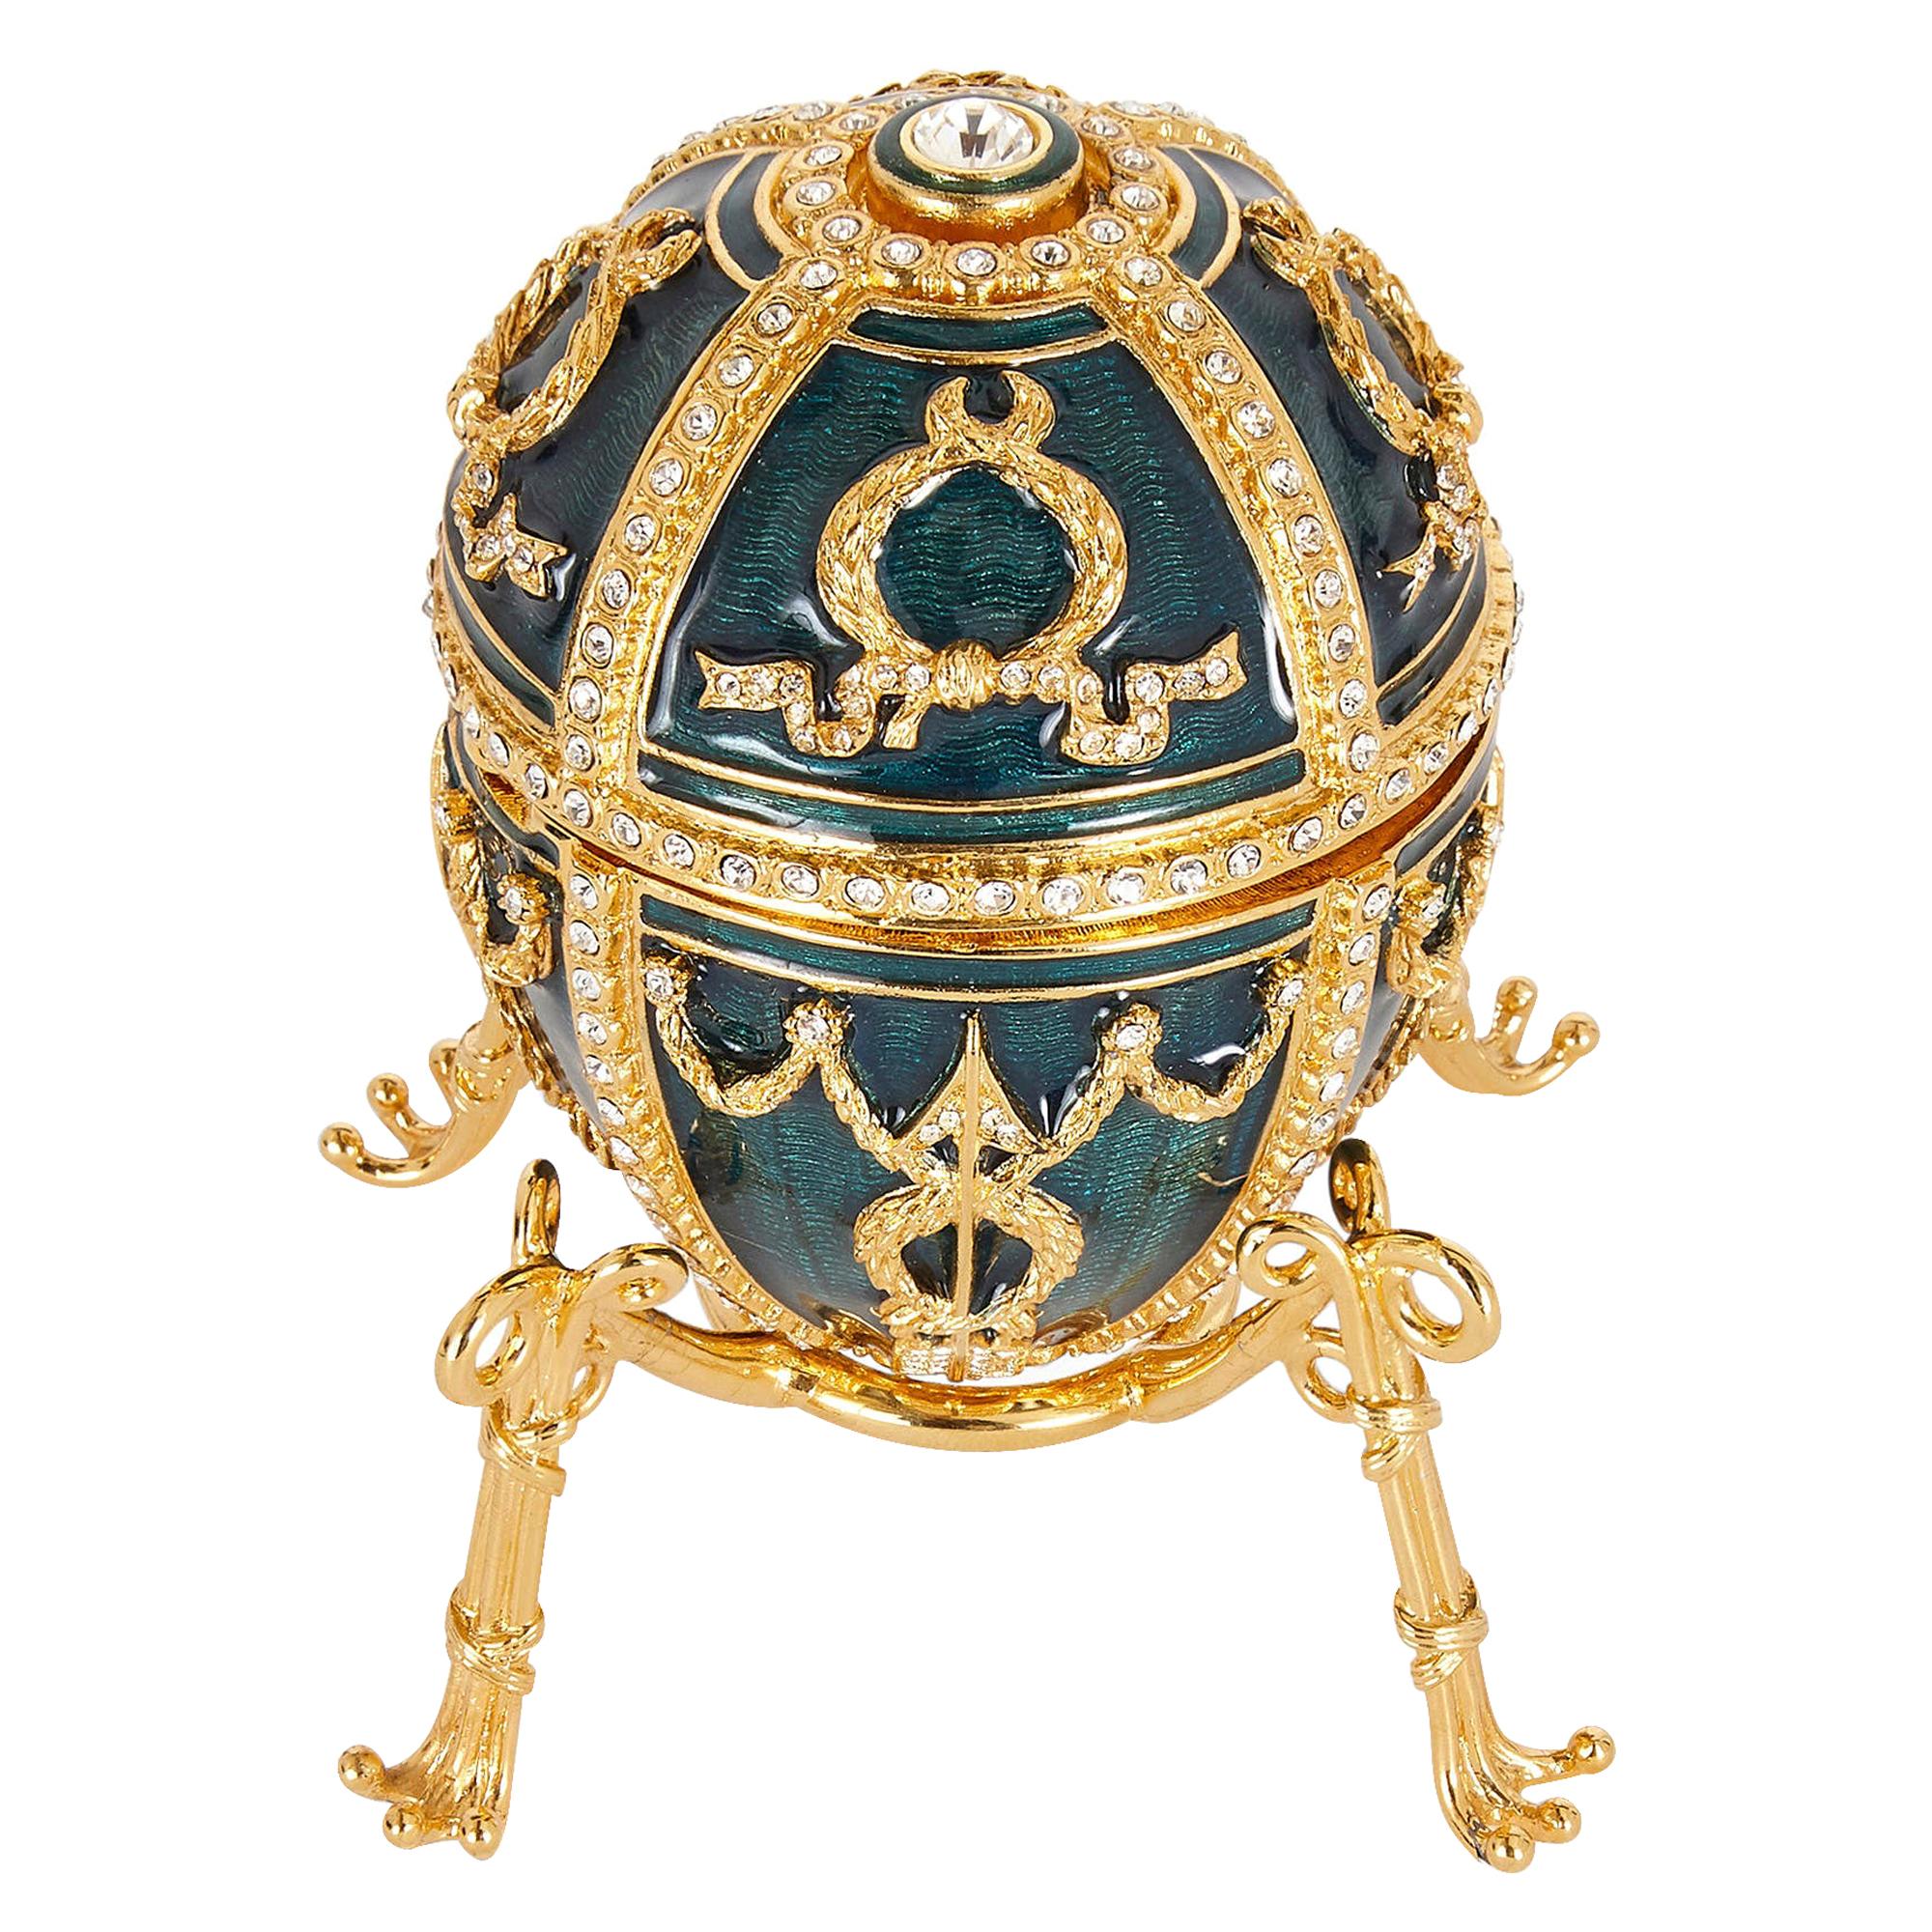 Contemporary Fabergé Easter Egg with Green Guilloché Enamel and Gemstones